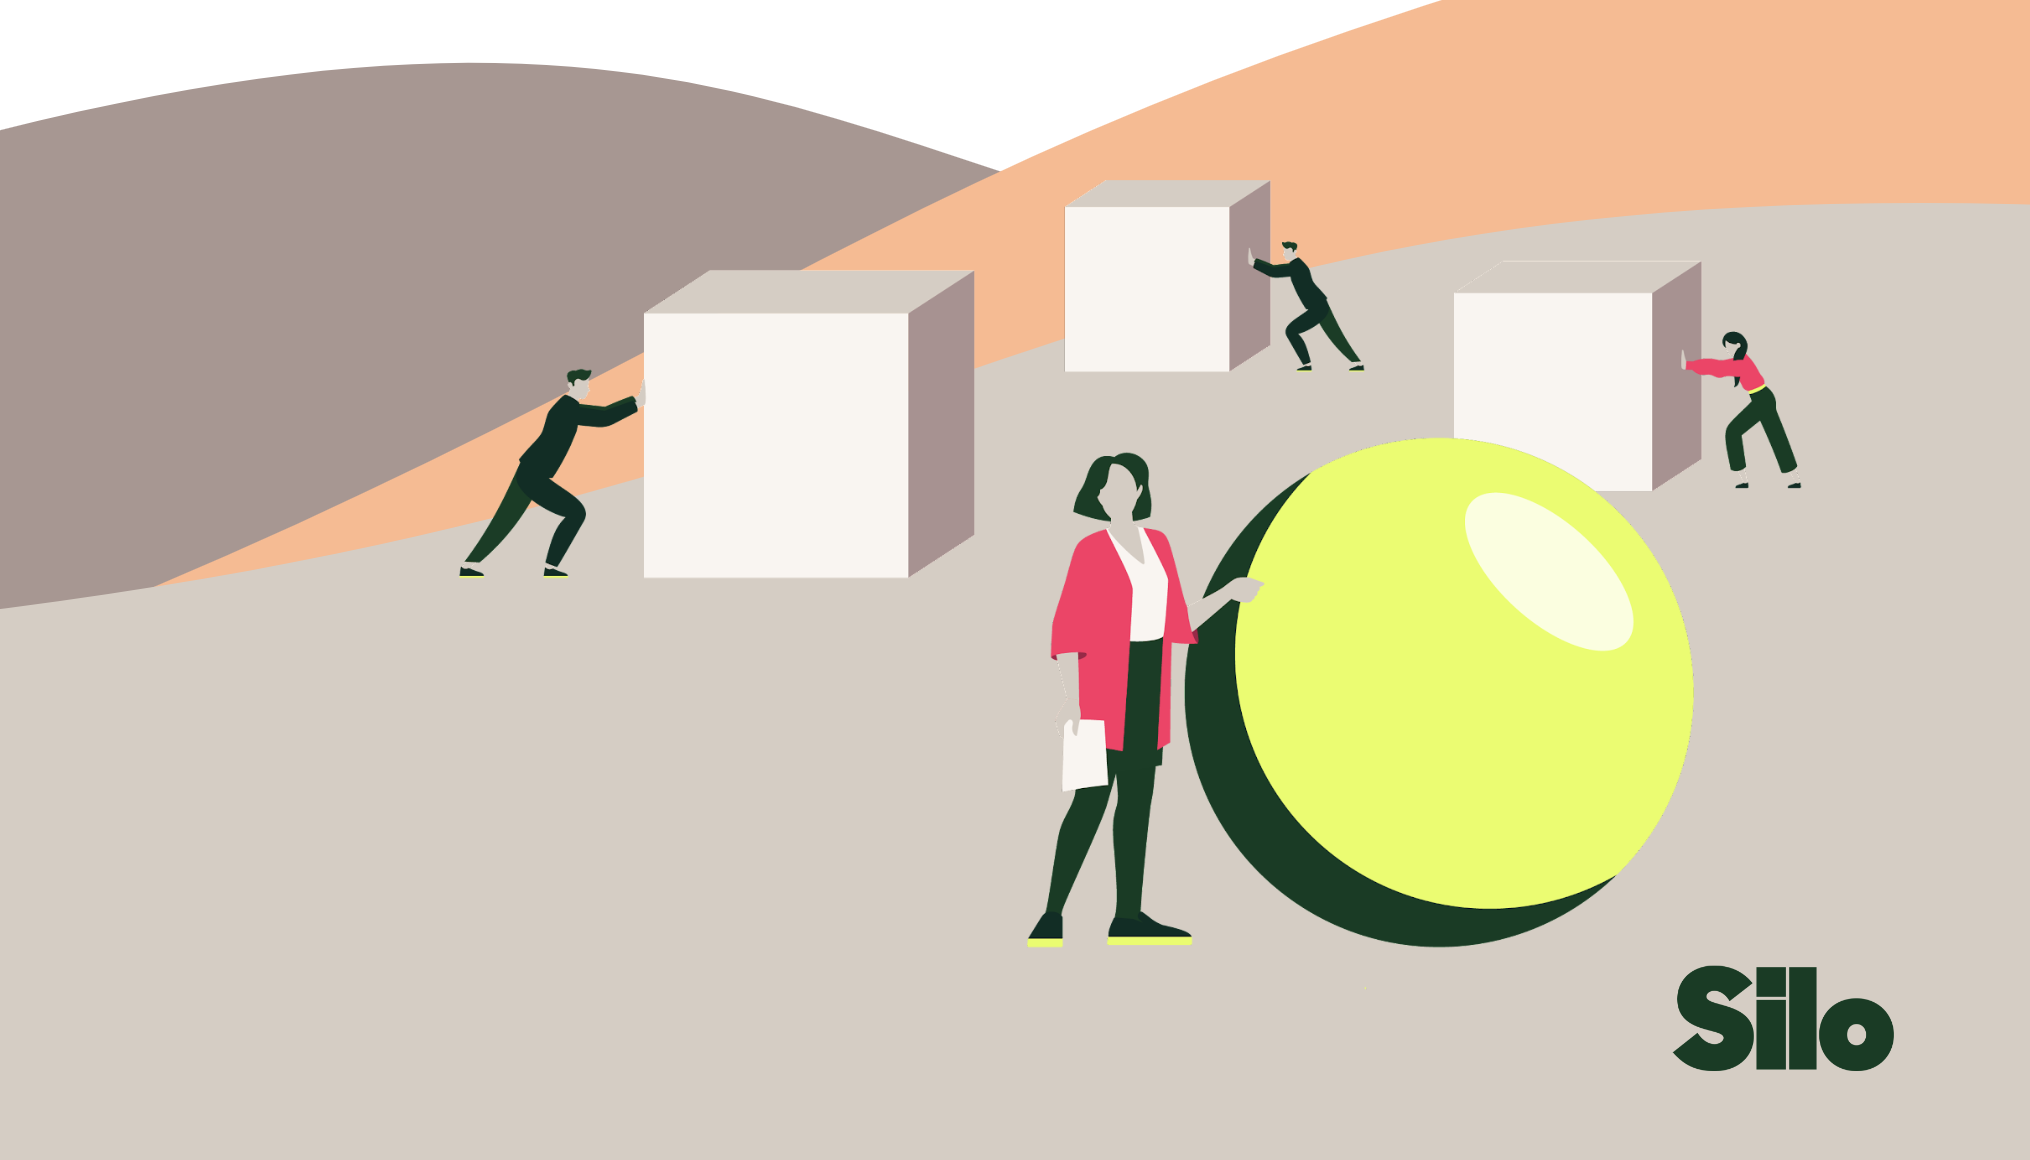 Illustrations of different people pushing squares around, while another person effortlessly pushes a ball. Having access to capital makes growth MUCH easier. 